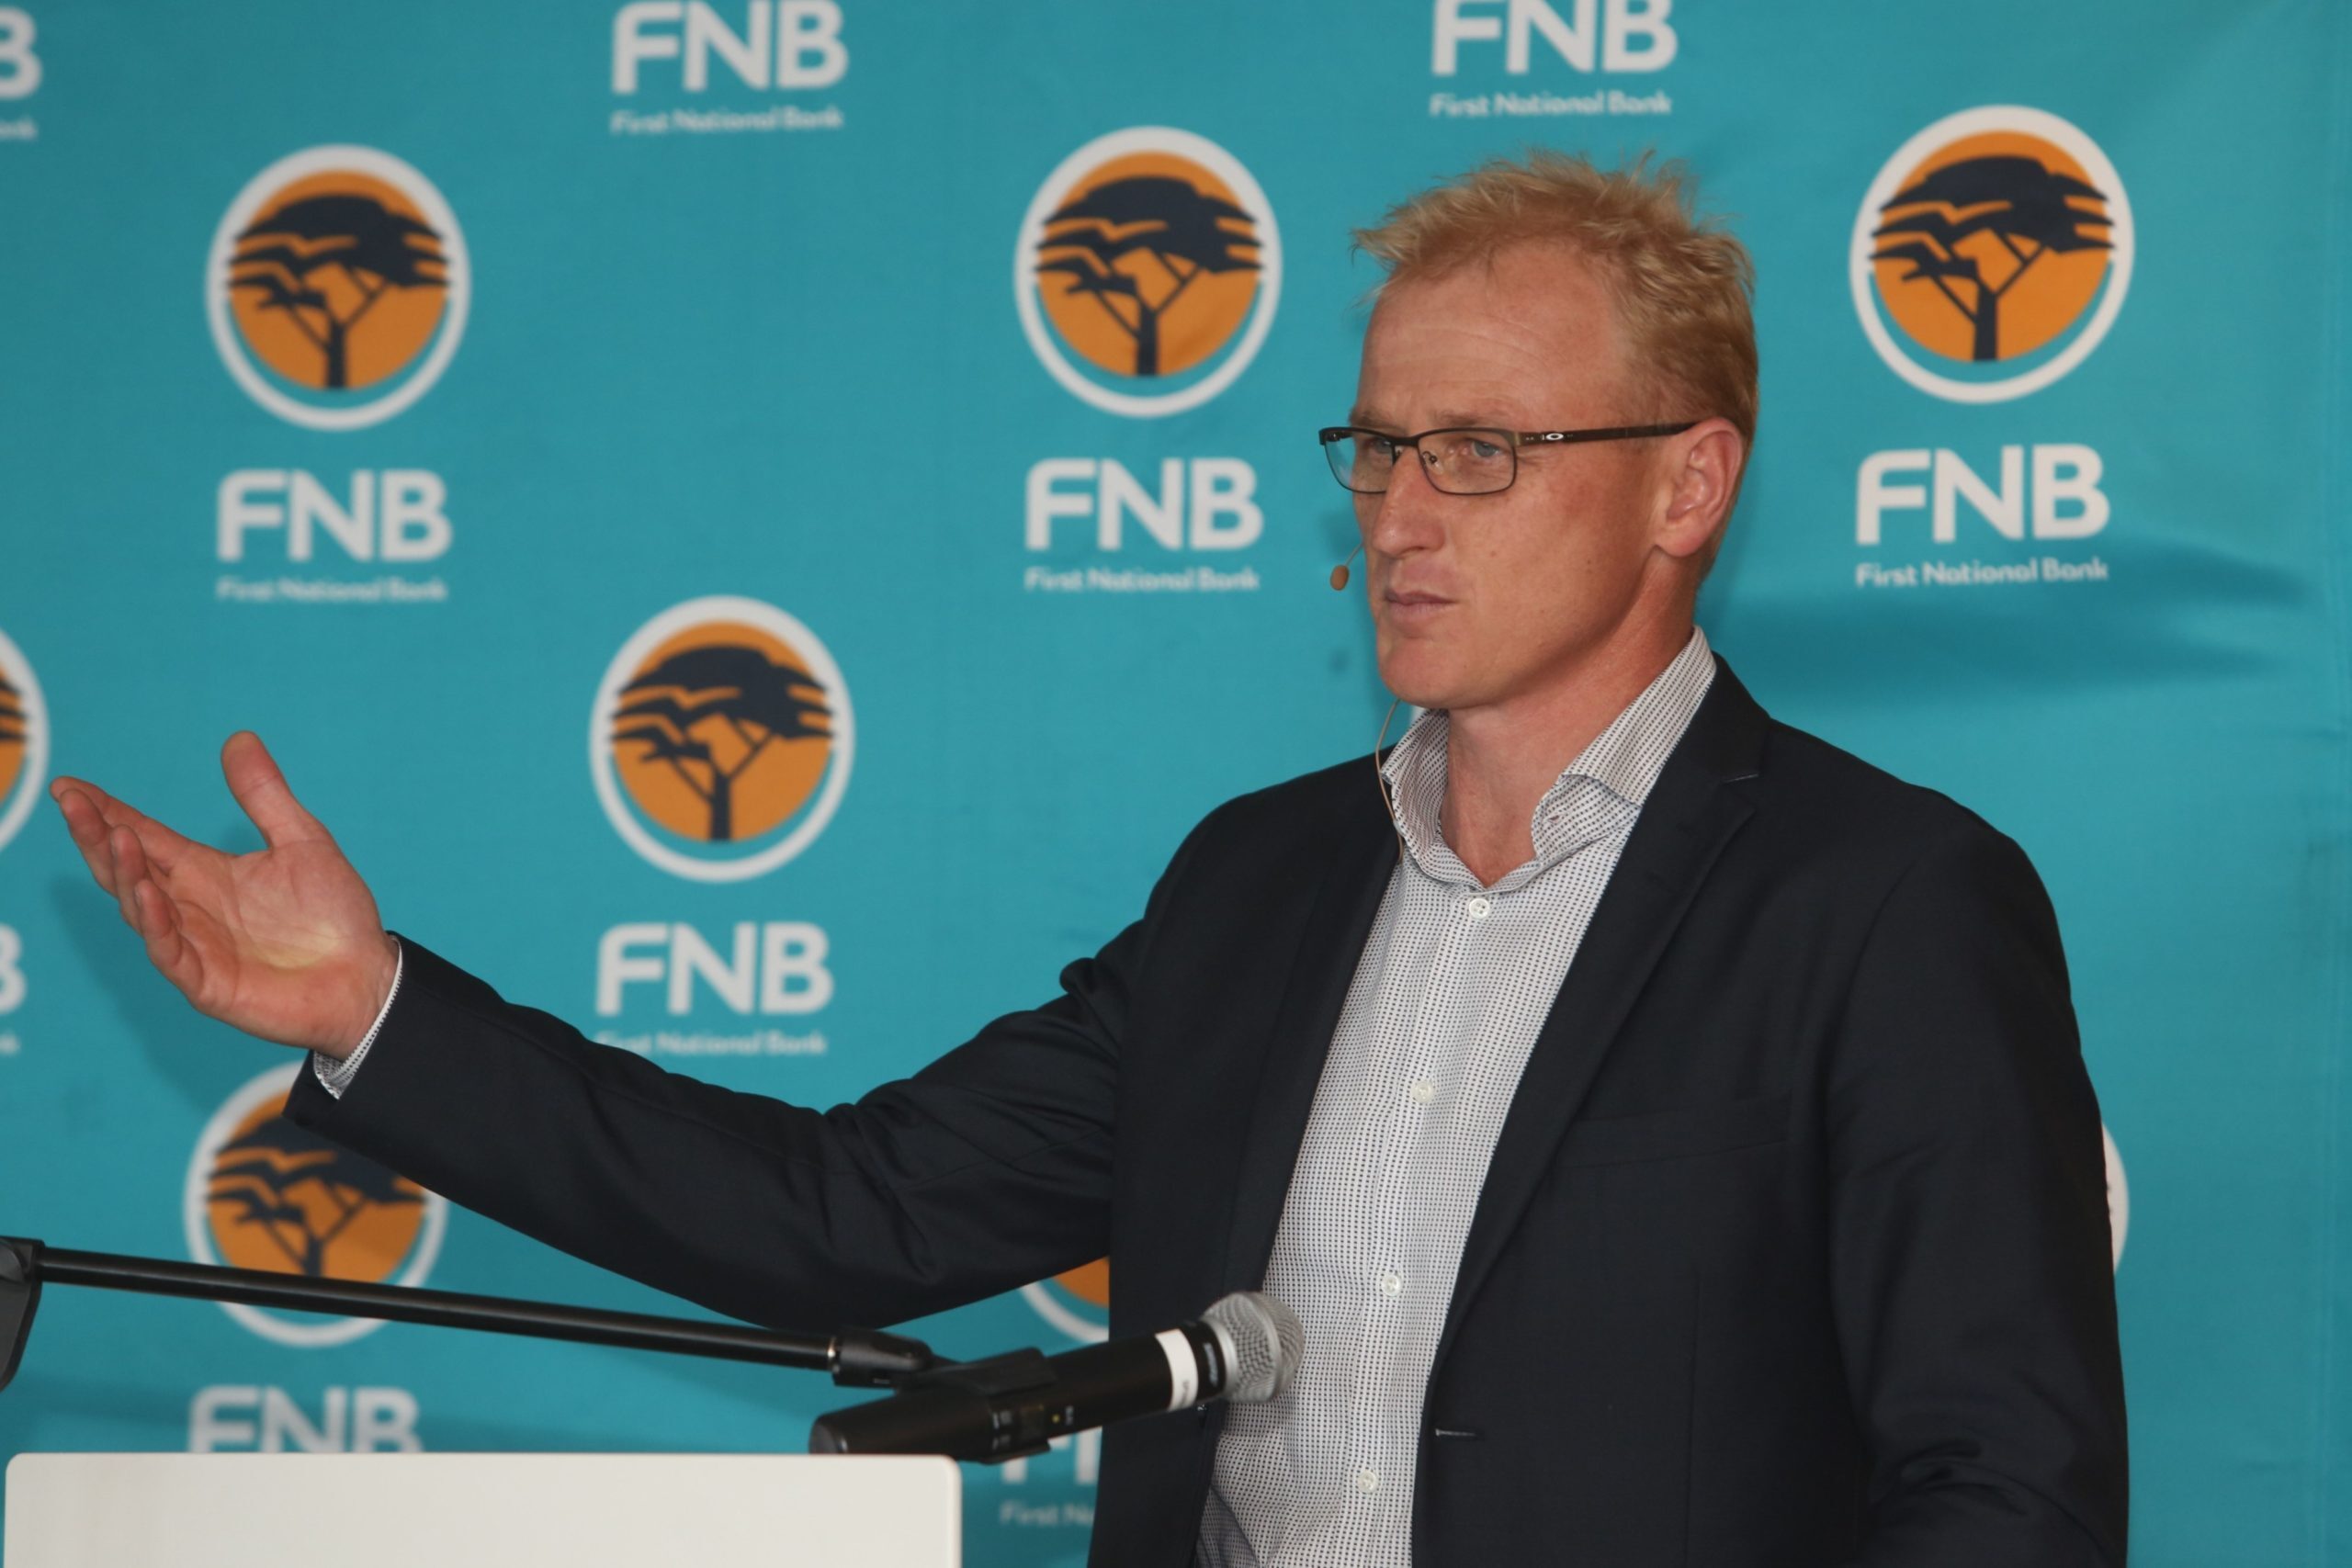 "Behold the myriad ways to pay" - FNB CEO Jacques Cilliers (He didn't actually say that)